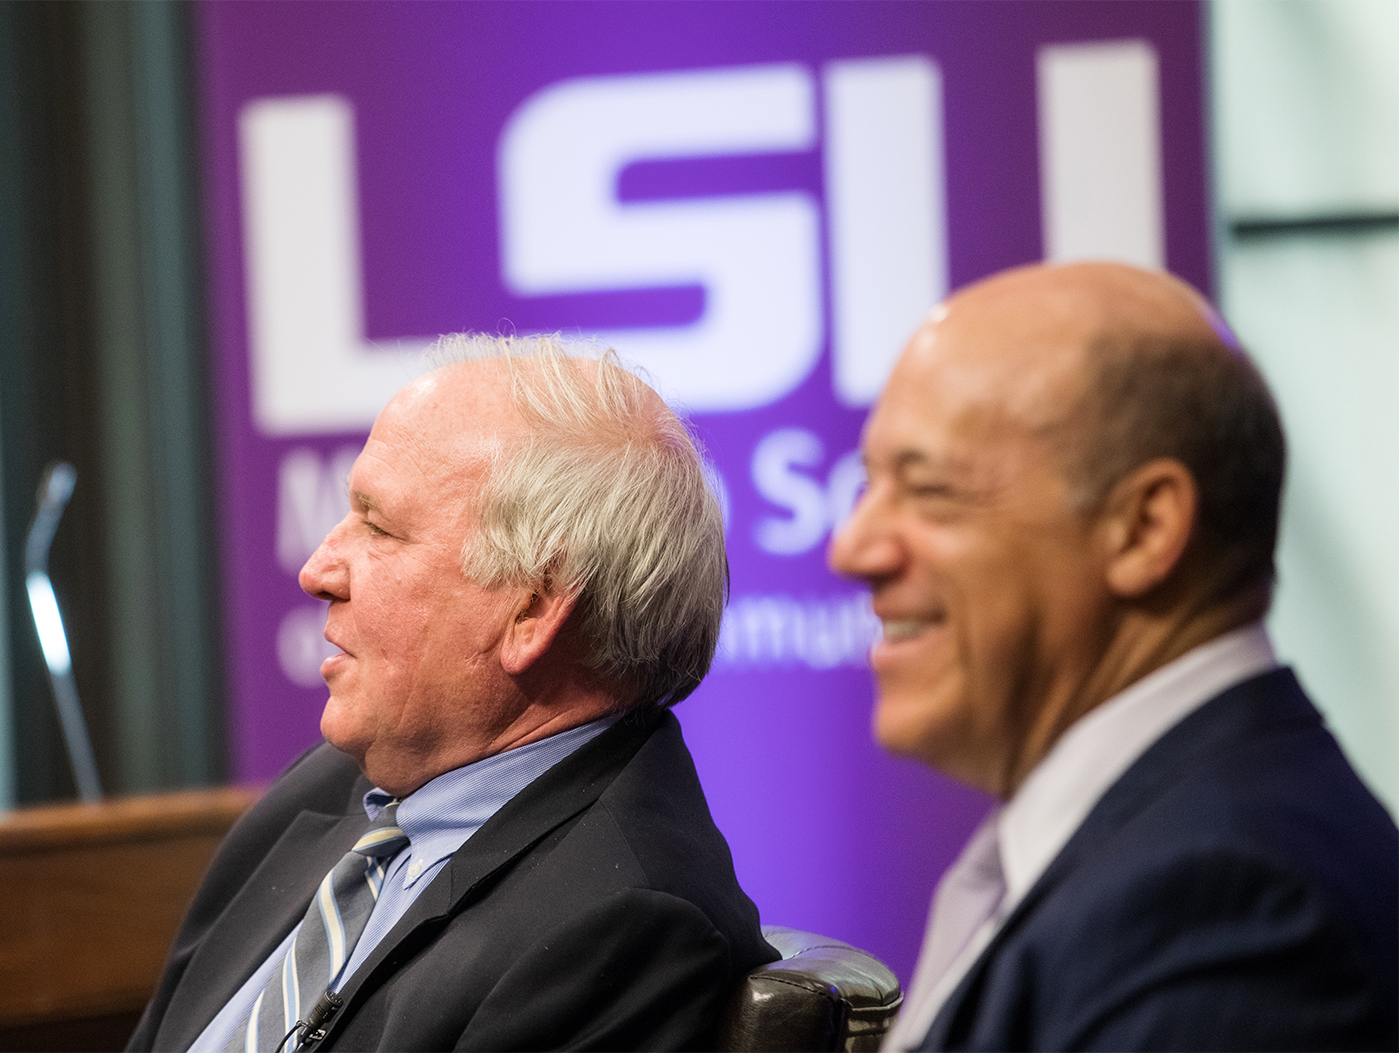 Former presidential press secretaries Mike McCurry and Ari Fleischer share their insider perspectives on this key communications role